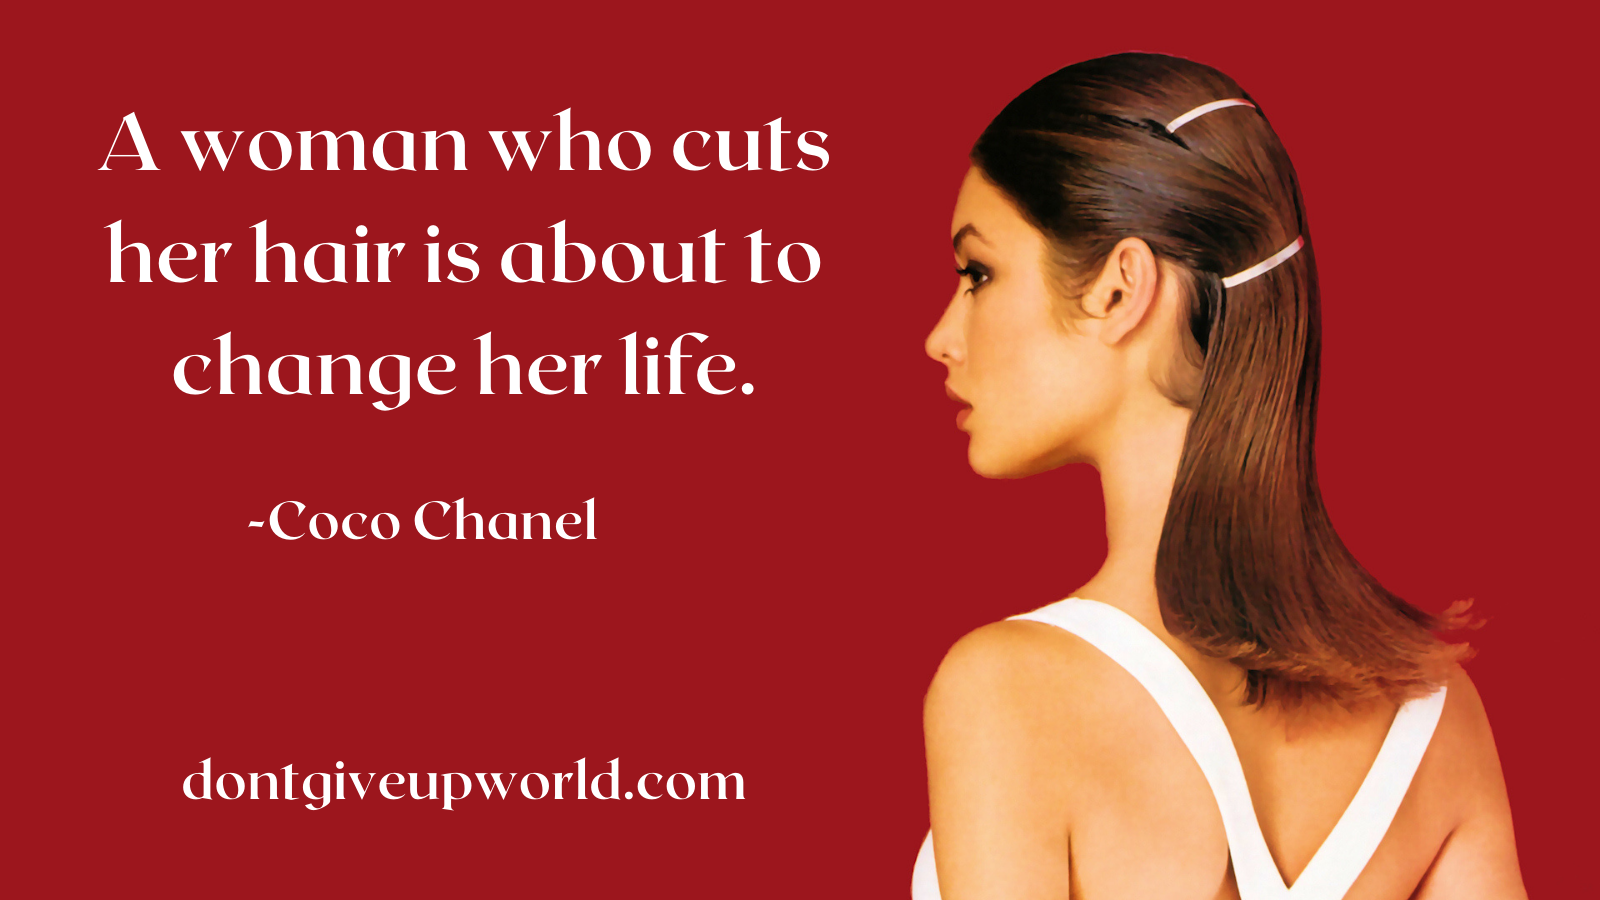 Coco Chanel Quote A woman who cuts her hair is about to change her life